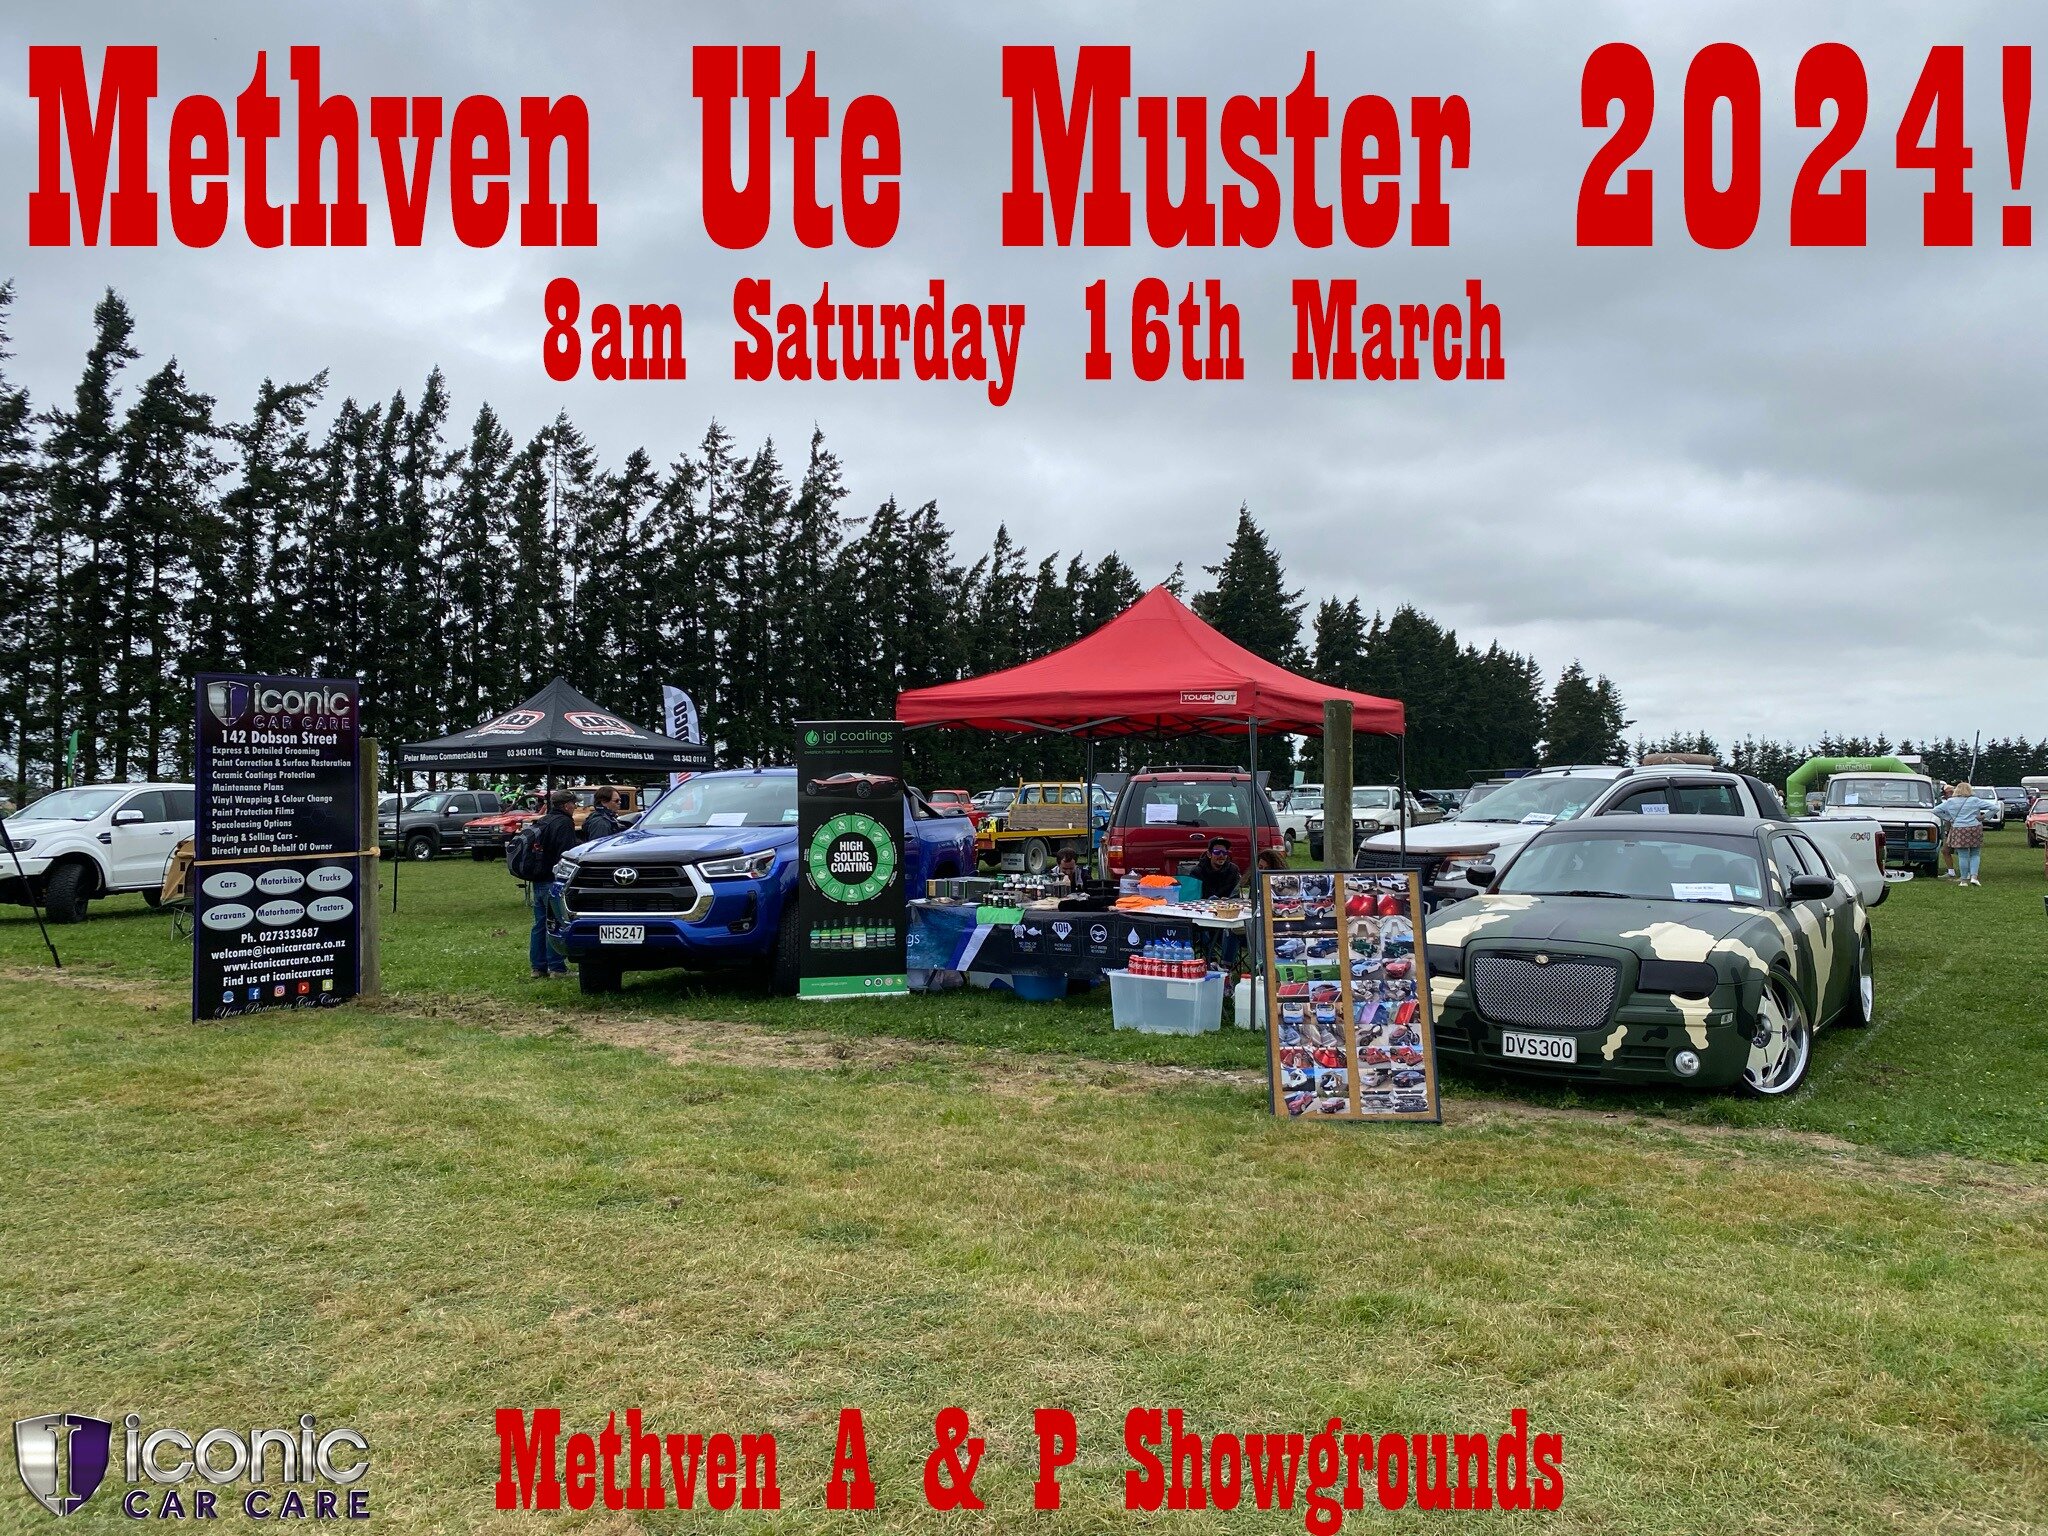 🔥See you at the Methven Ute Muster this weekend!🔥

On Saturday the 16th of March is the return of the Annual Methven Ute Muster and it's bigger and better than ever! Held alongside the Methven A&amp;P Show, the ute muster is a great experience for 